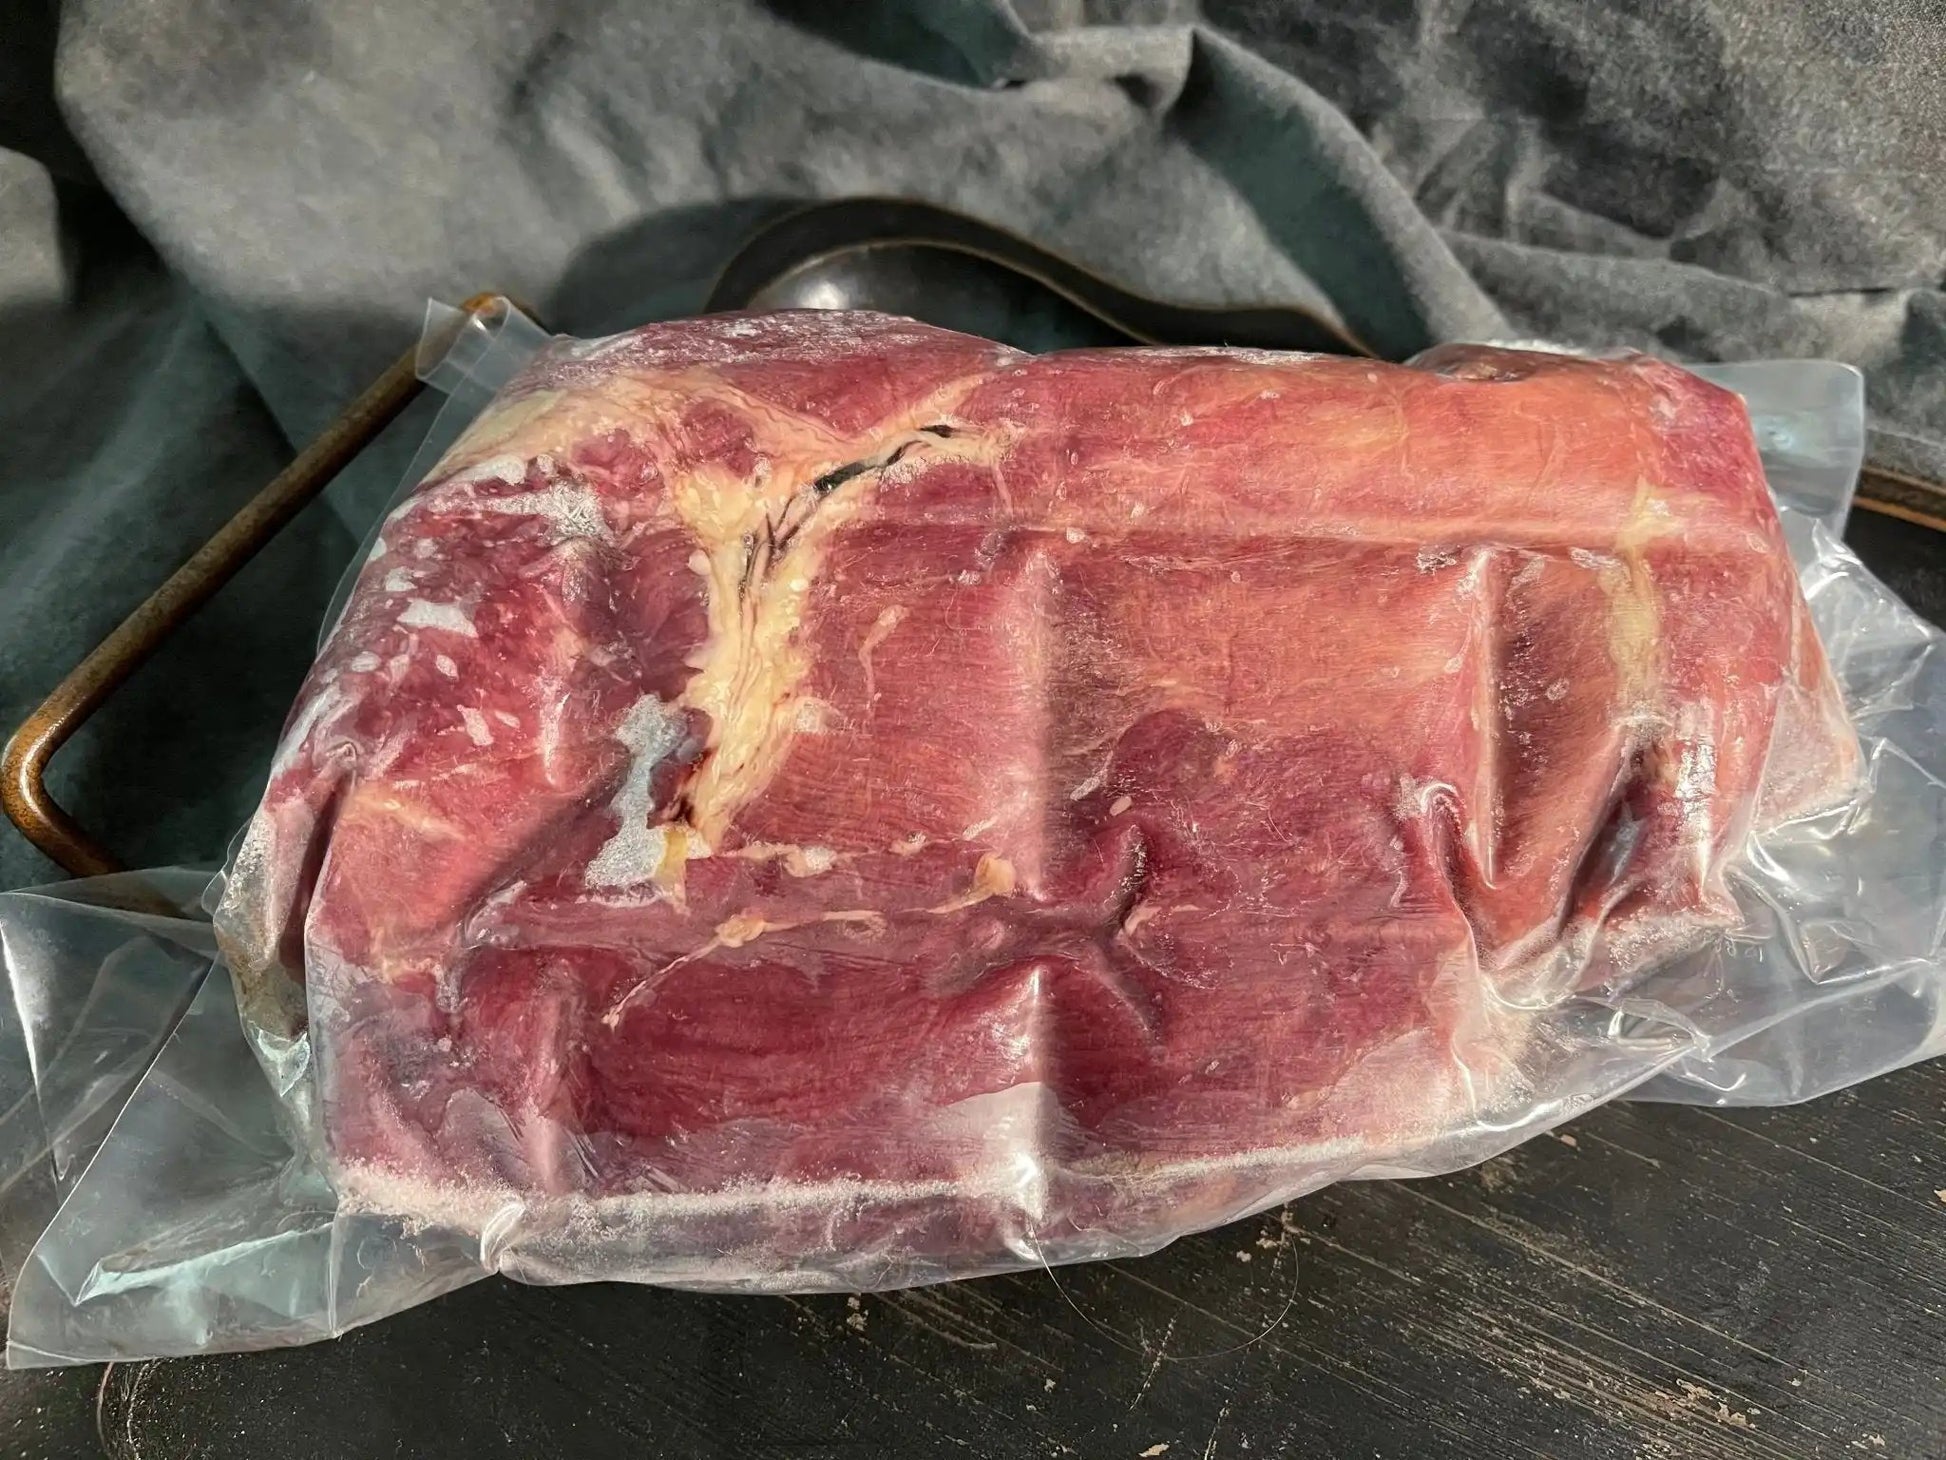 100% All-Natural Grass-Fed "Misfit" Sirloin Tip Steak - The Hufeisen-Ranch (WYO Wagyu)